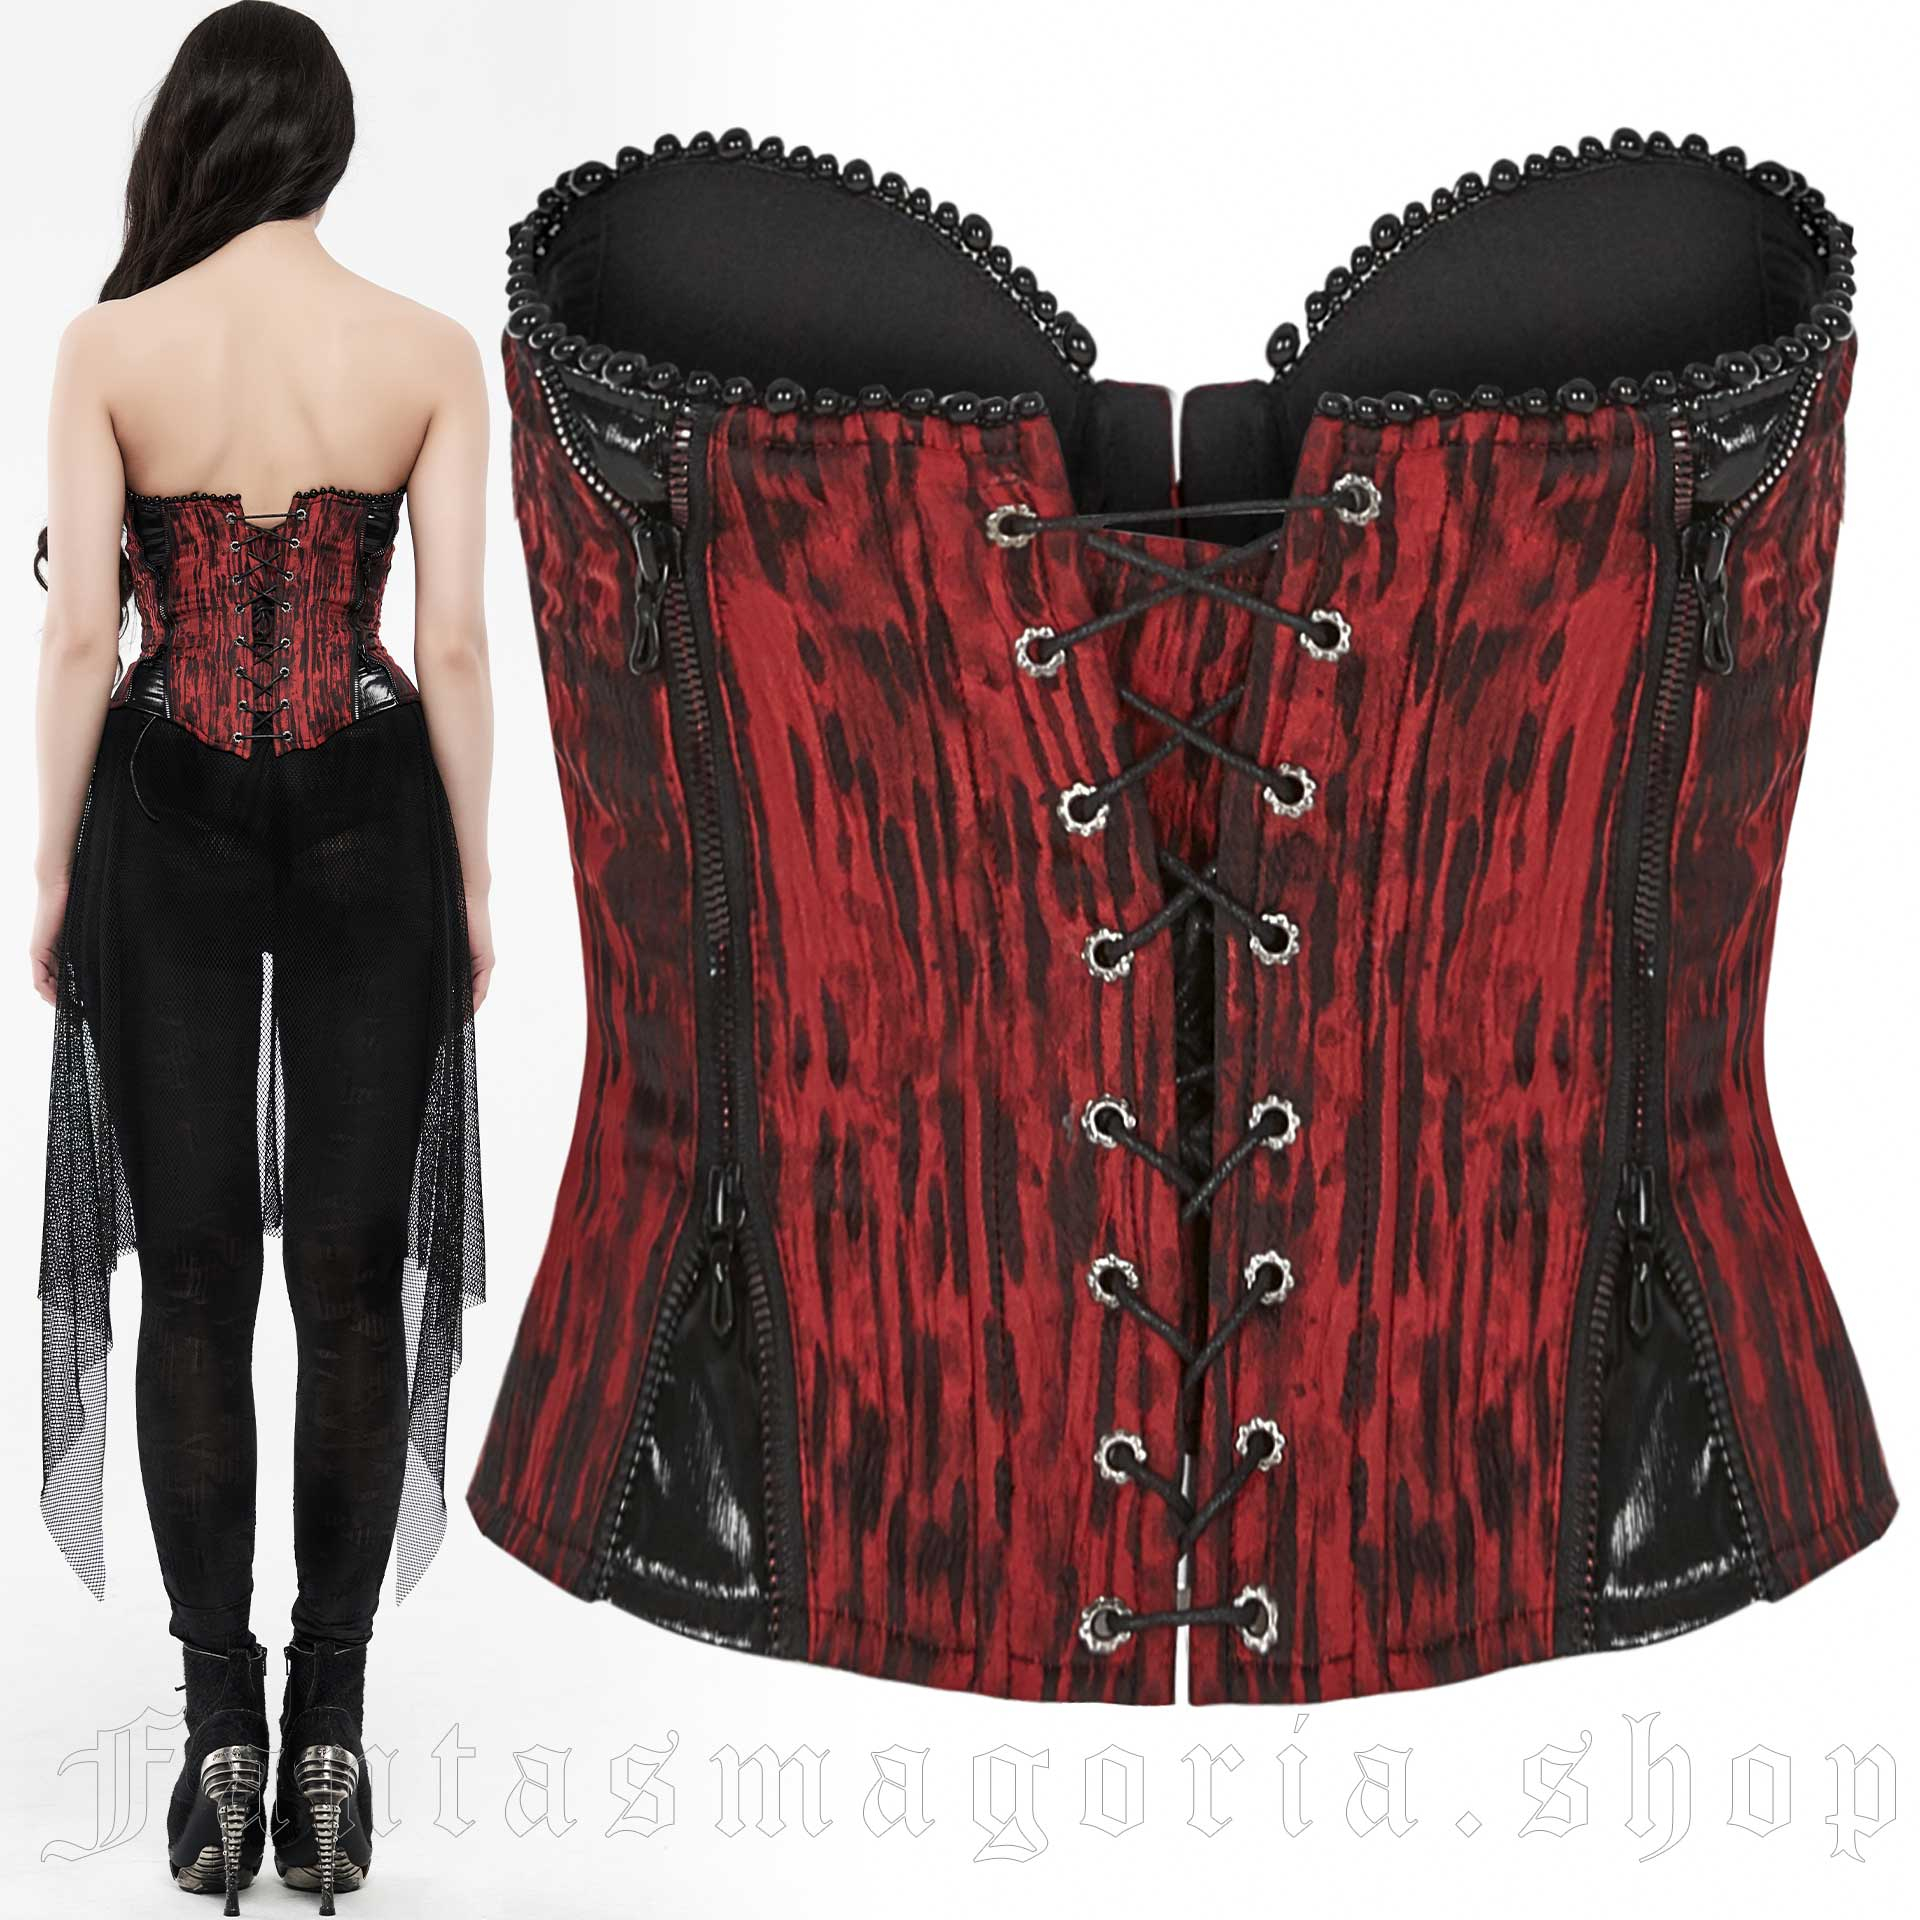 red corset top by the brand vaacodor. features black - Depop